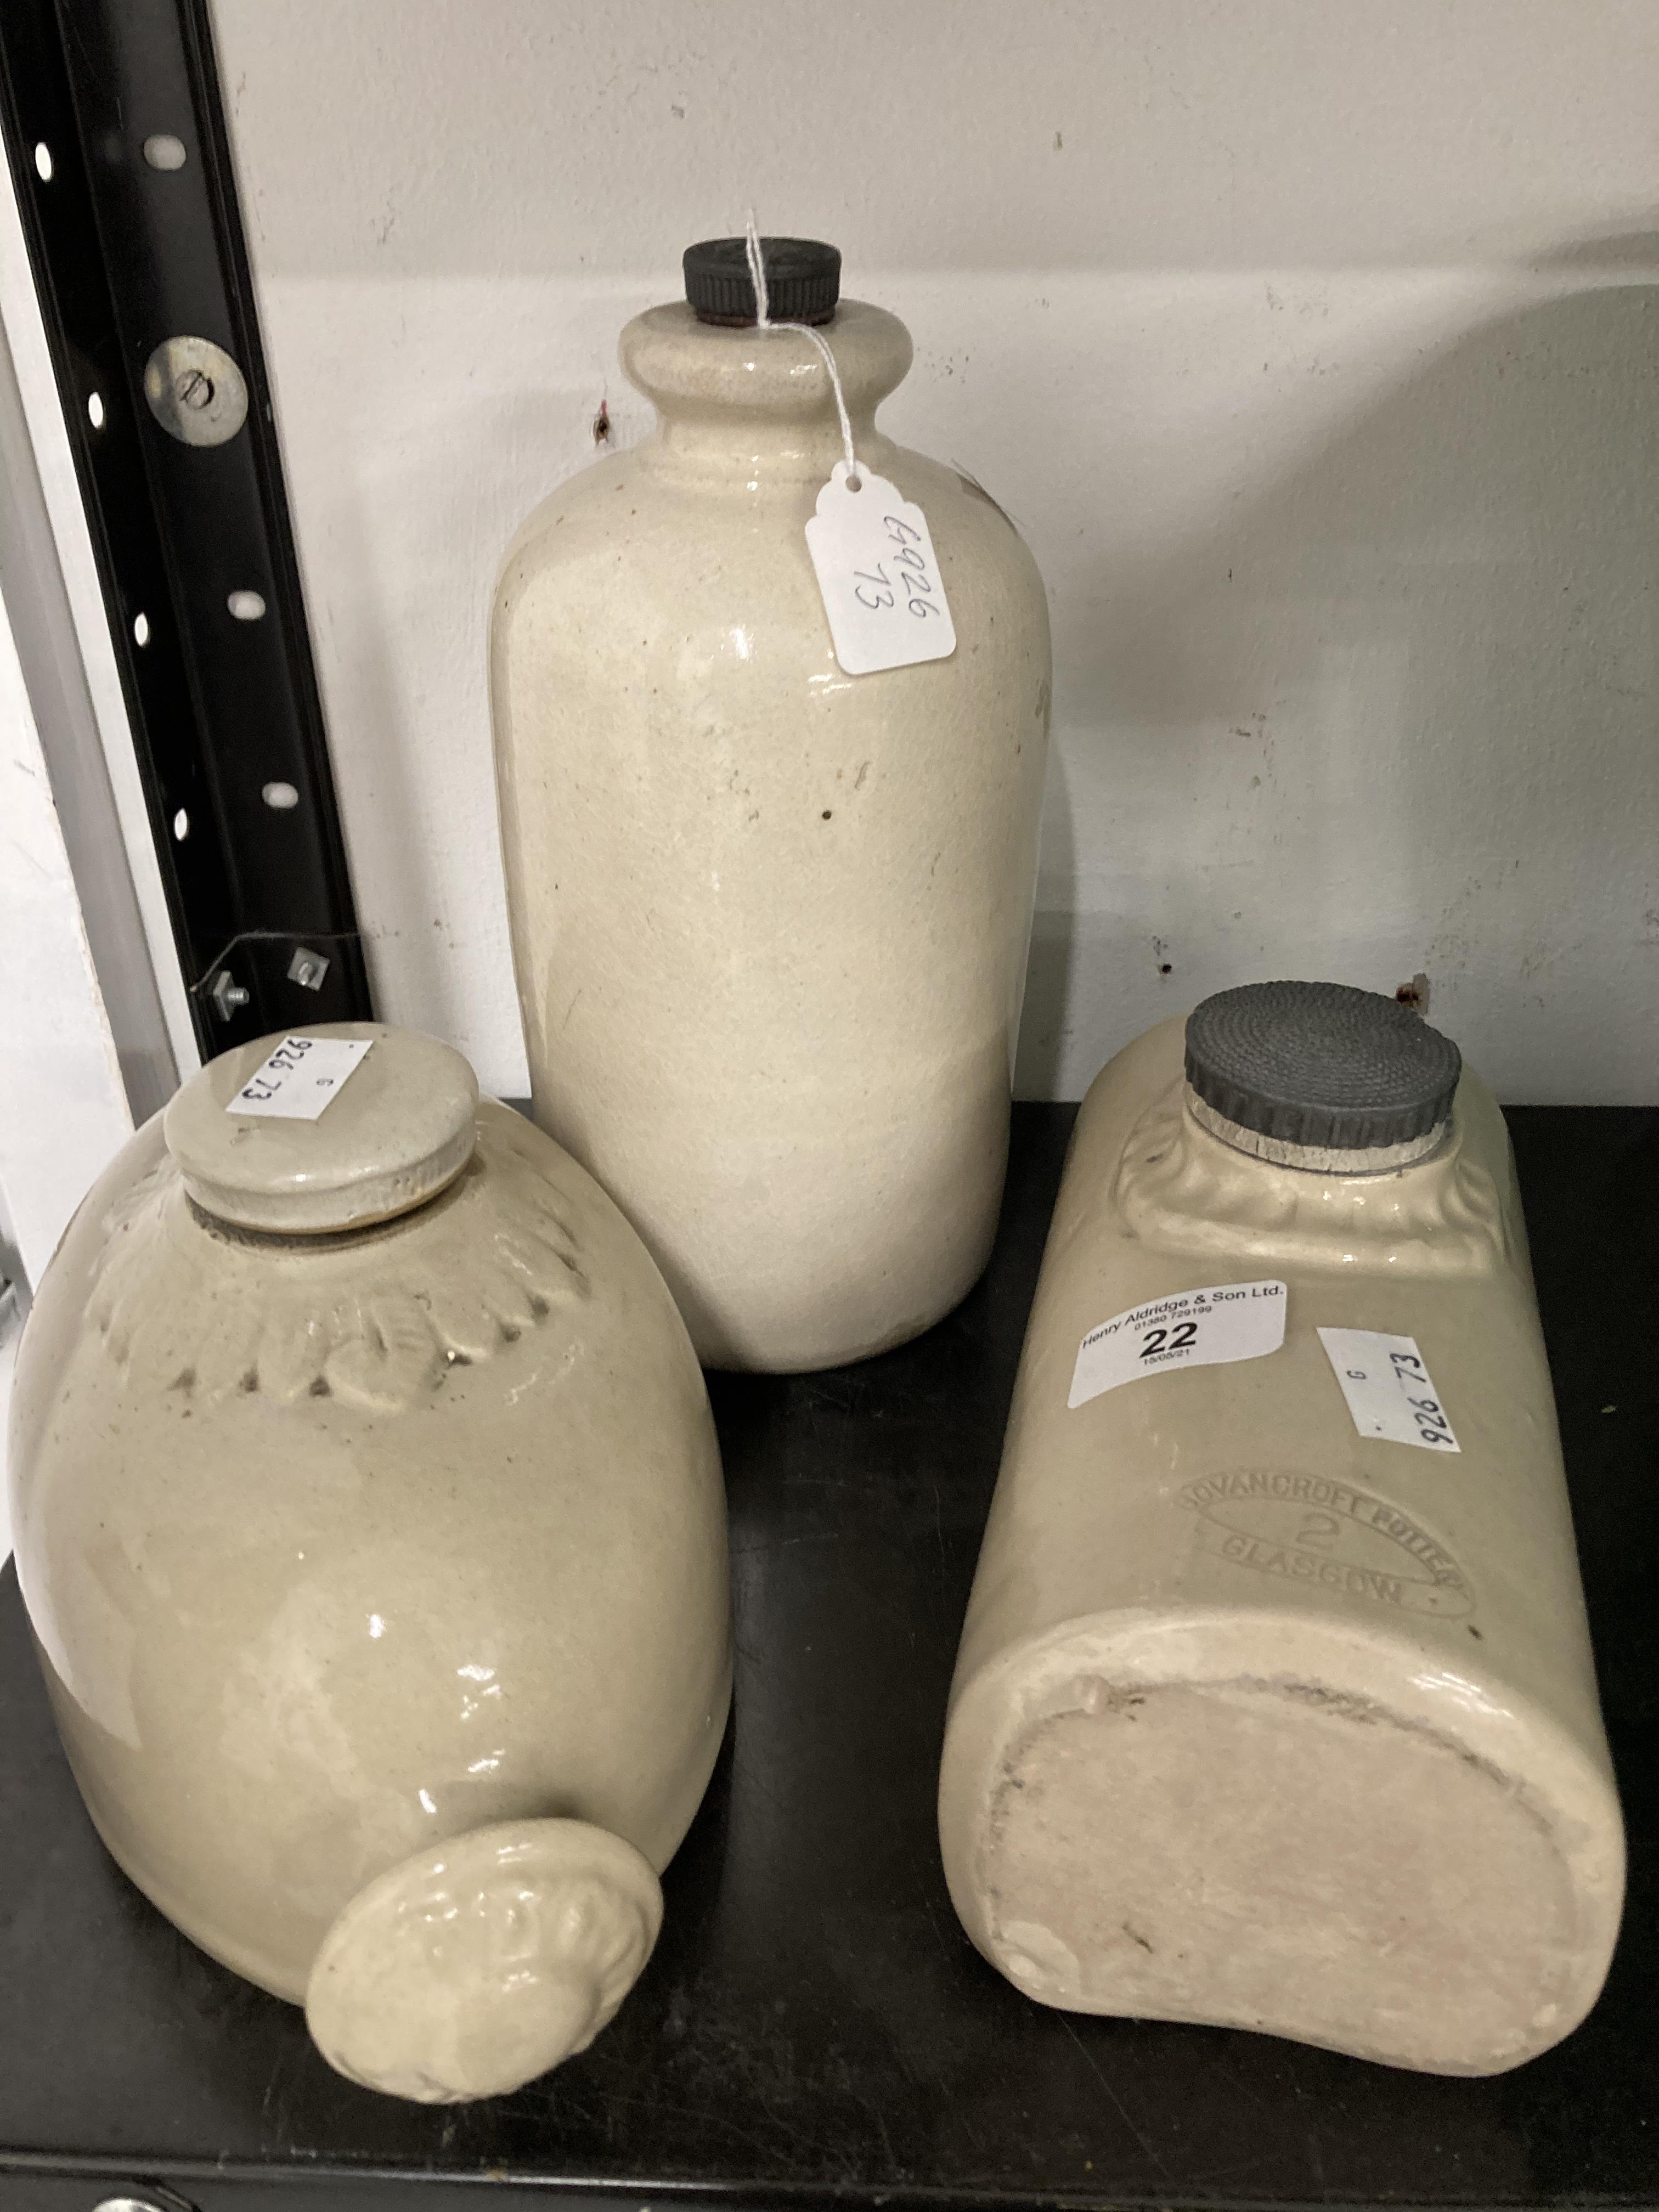 Stoneware: Two hot water bottles, one marked Bourne Denby, the second Govancraft Pottery Glasgow,